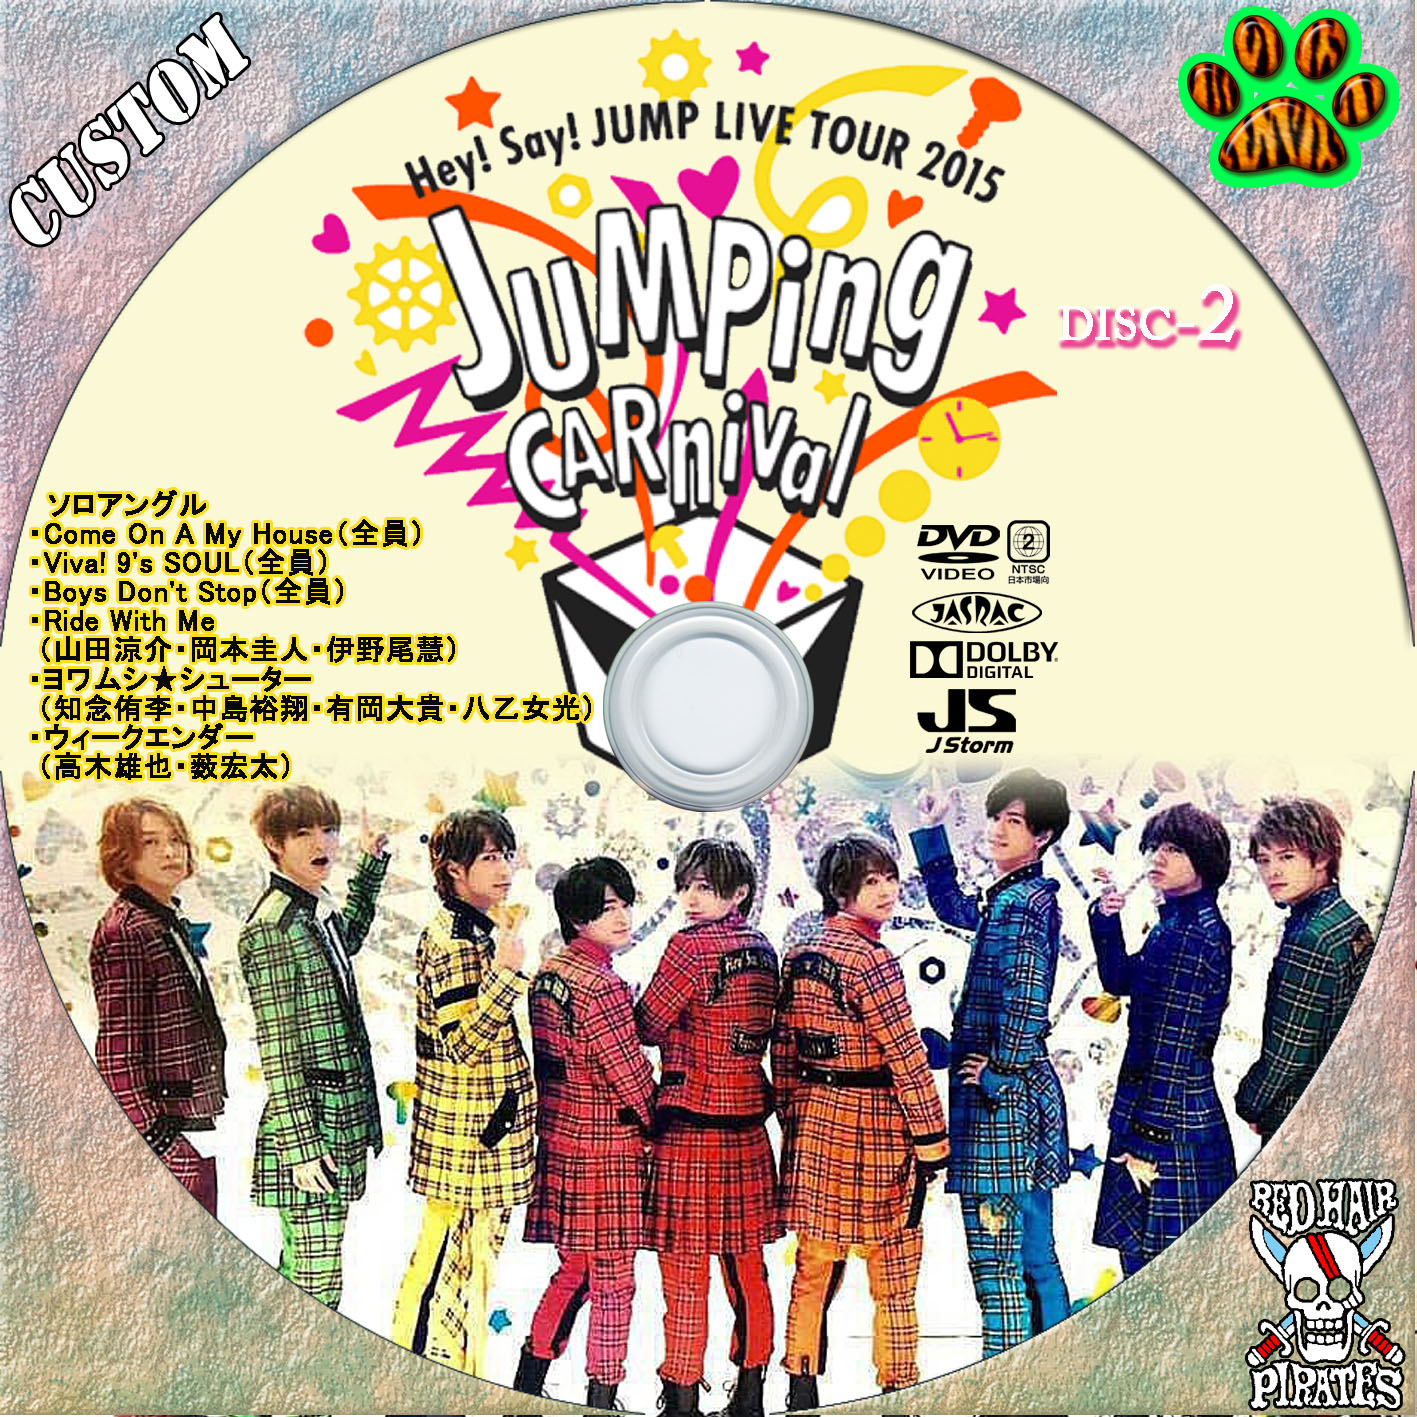 Hey! Say! JUMP LIVE TOUR 2015 JUMPing CARnival - 赤髪船長のCUSTOM ...